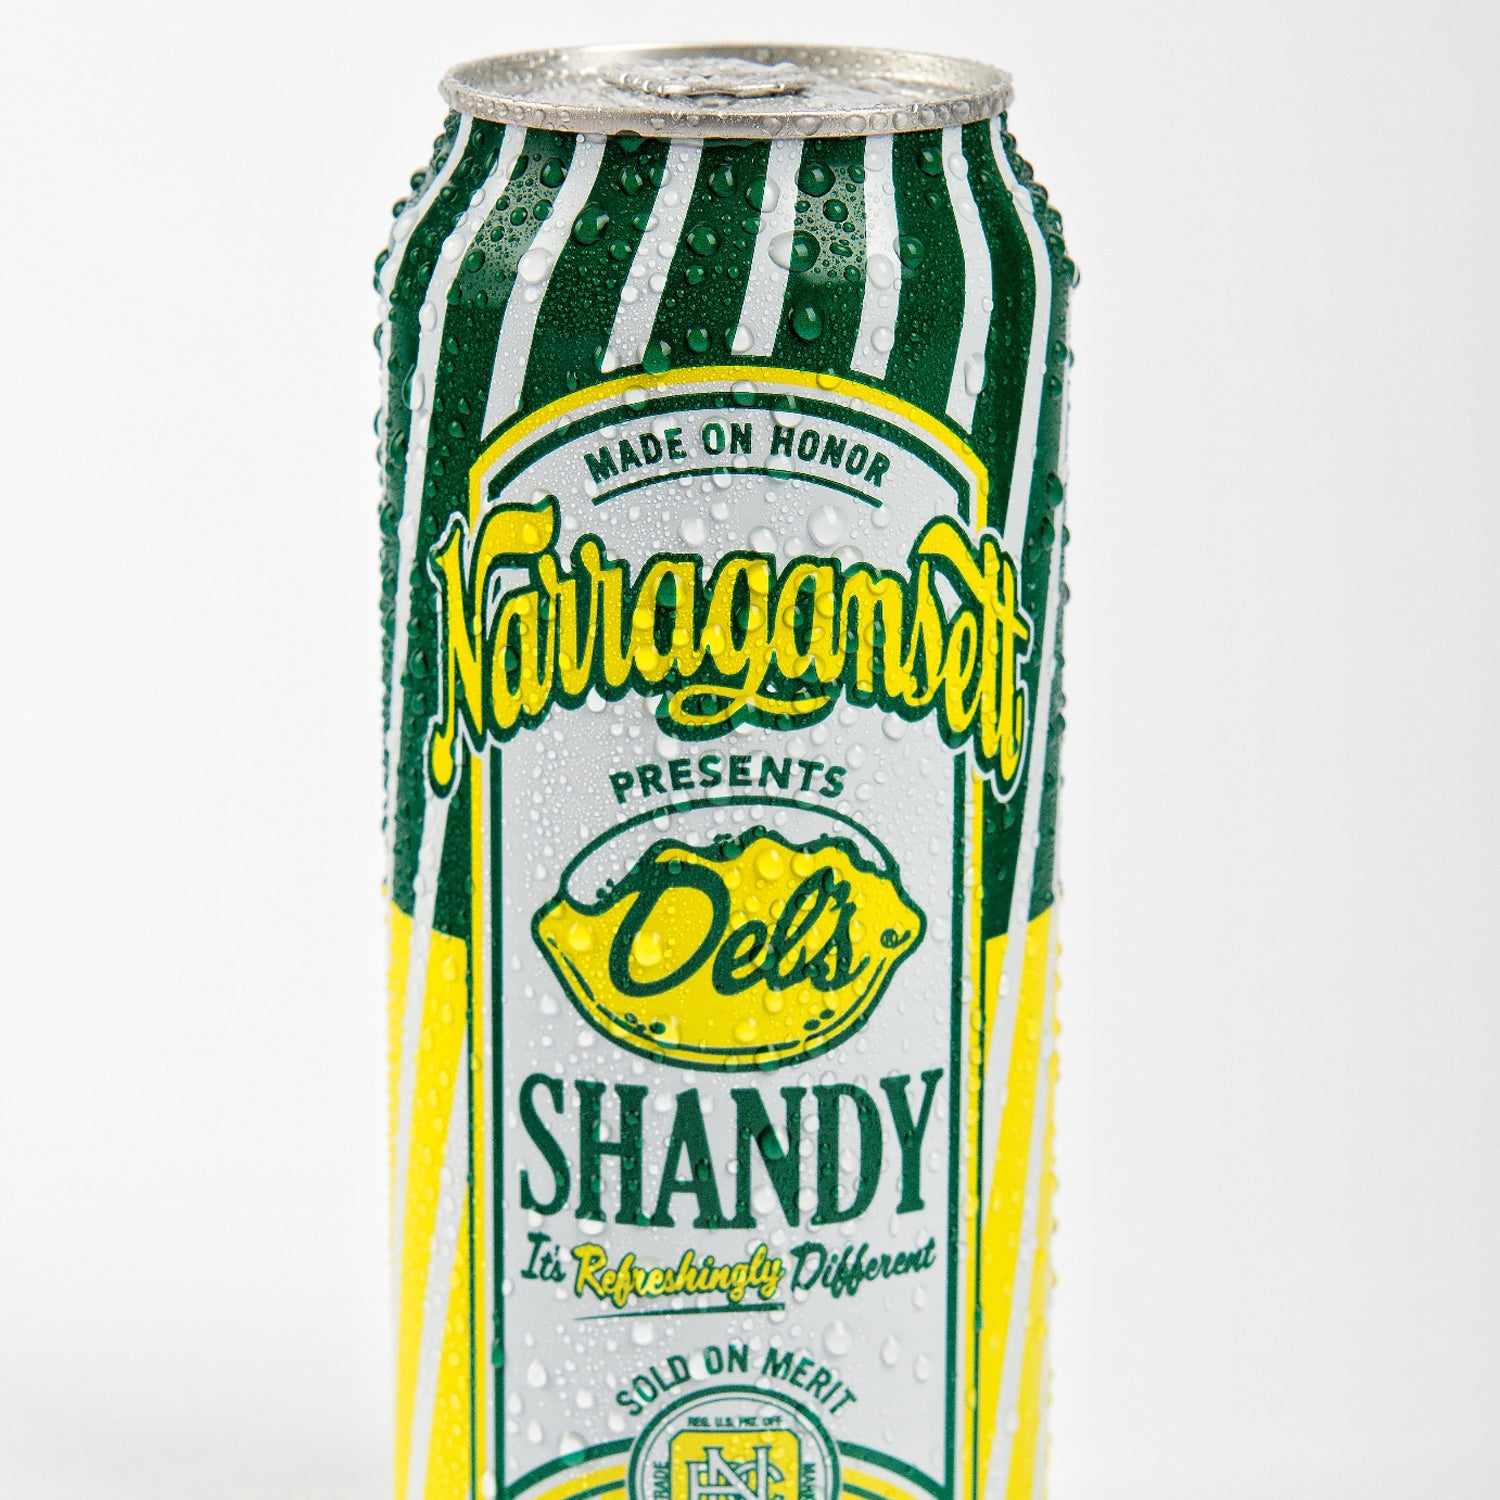 Narragansett Brewing dels shandy canned beer outside rafting and fishing summer